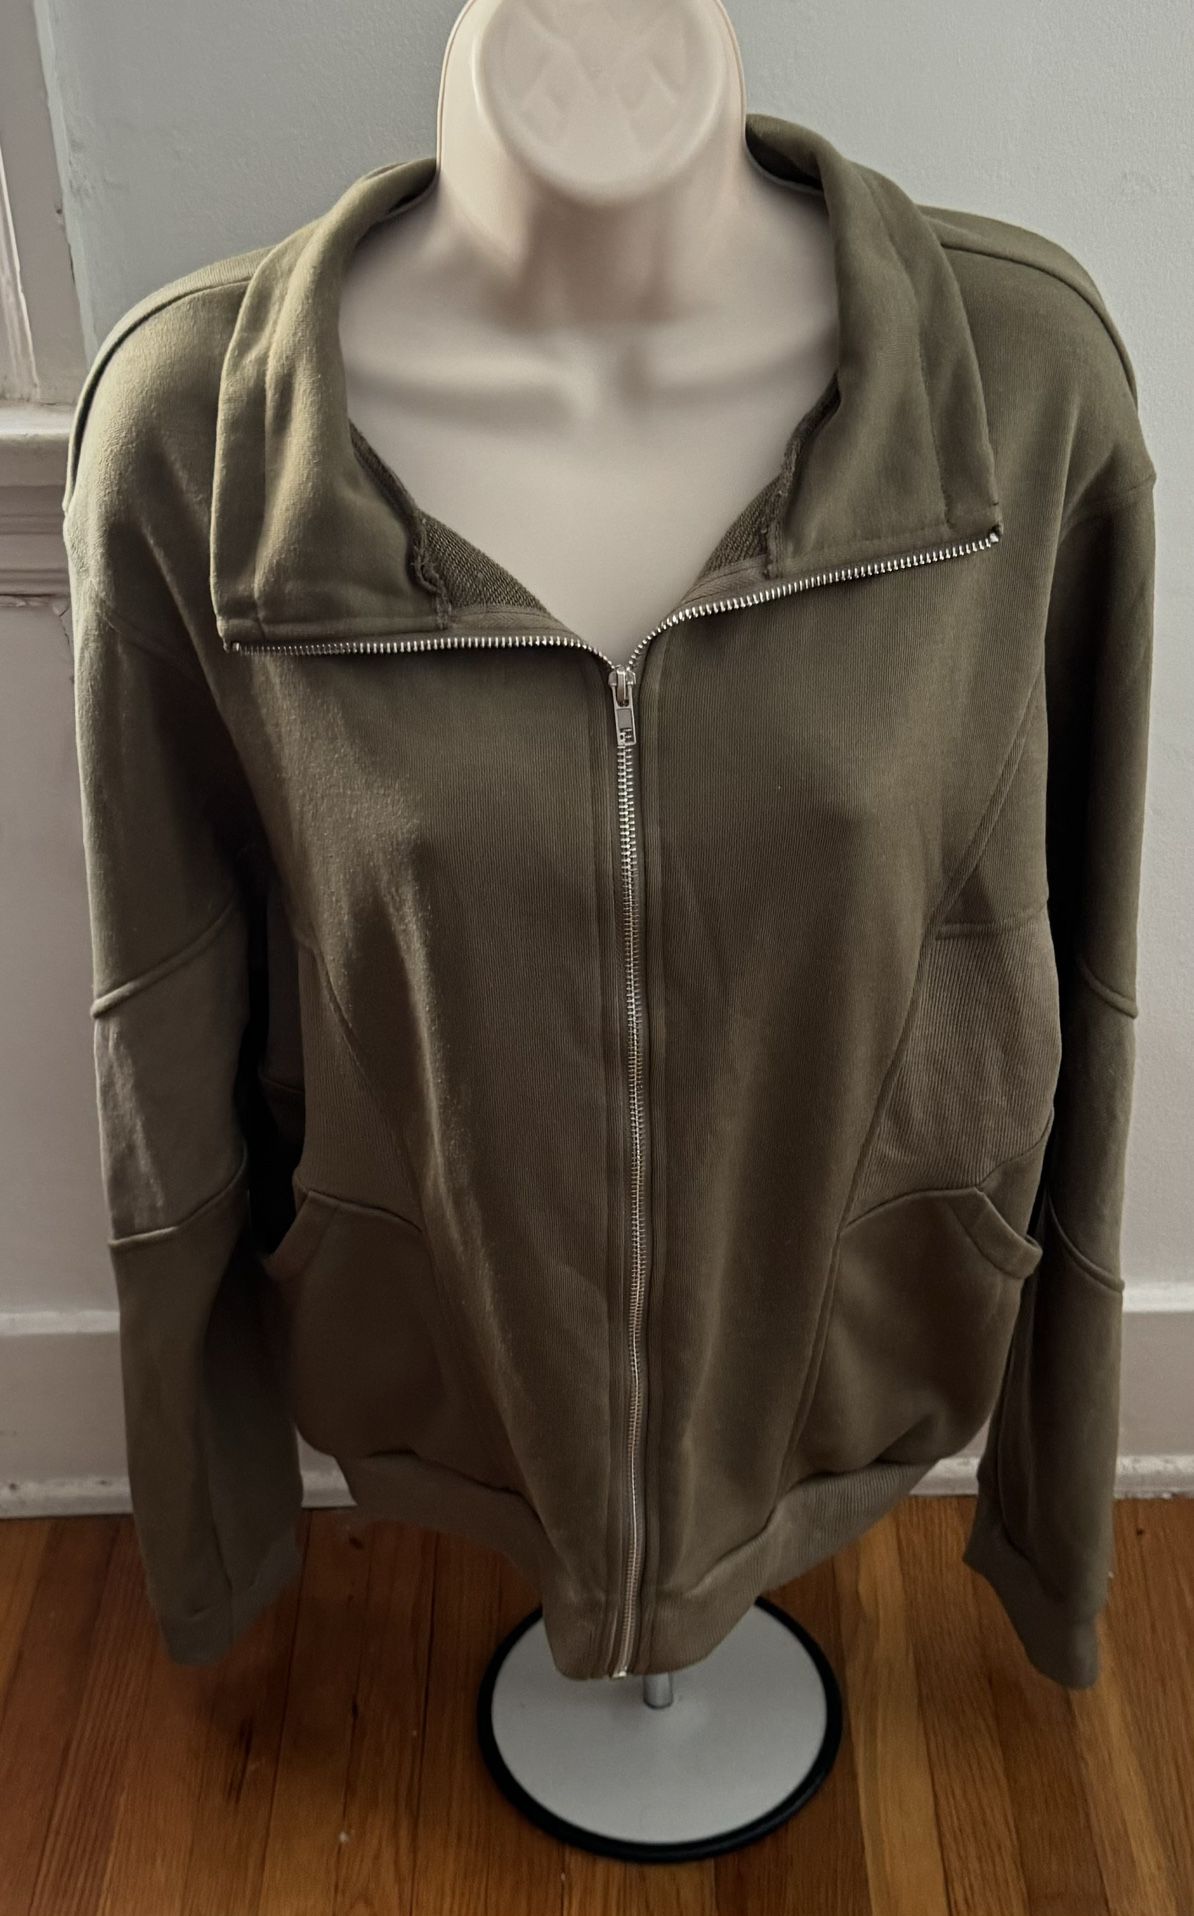 Women’s Olive Green Full Zip Cardigan with Pockets, size L